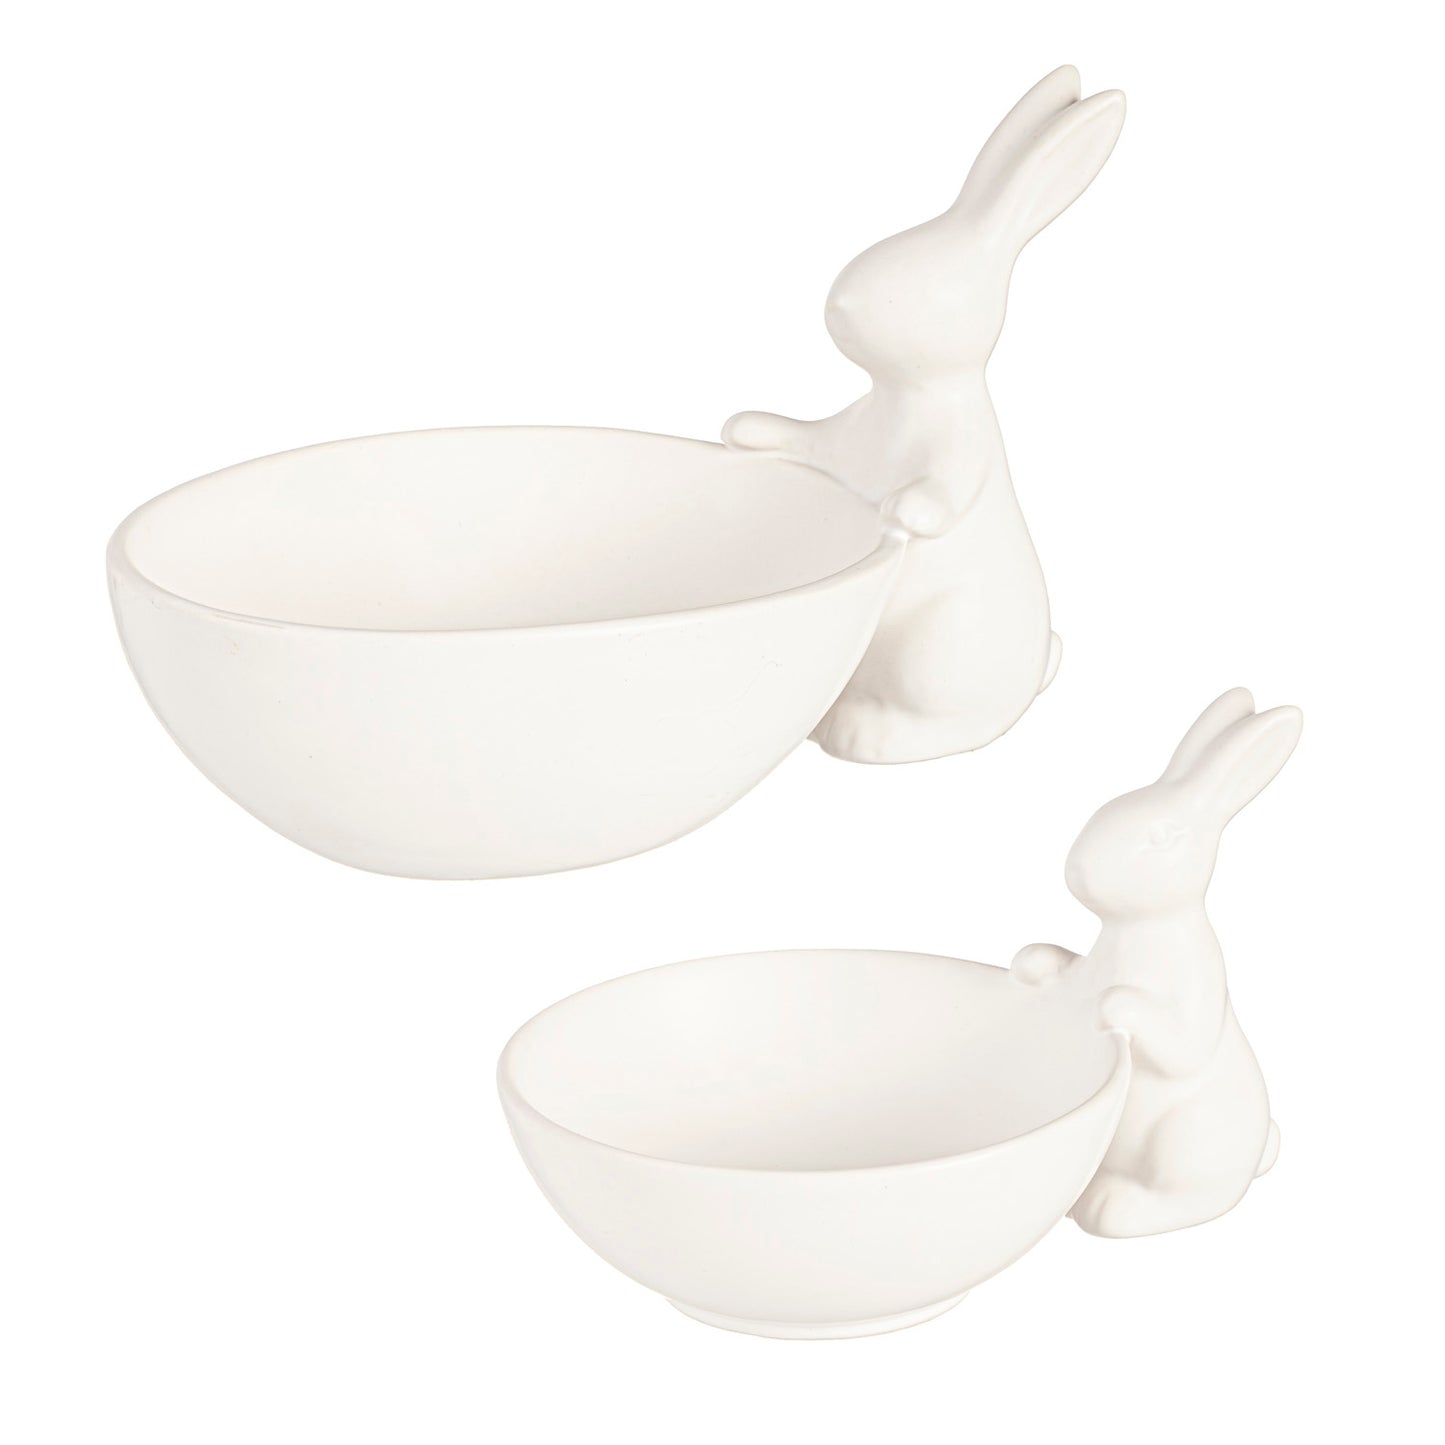 Ceramic Bunny with Bowl, Set of 2